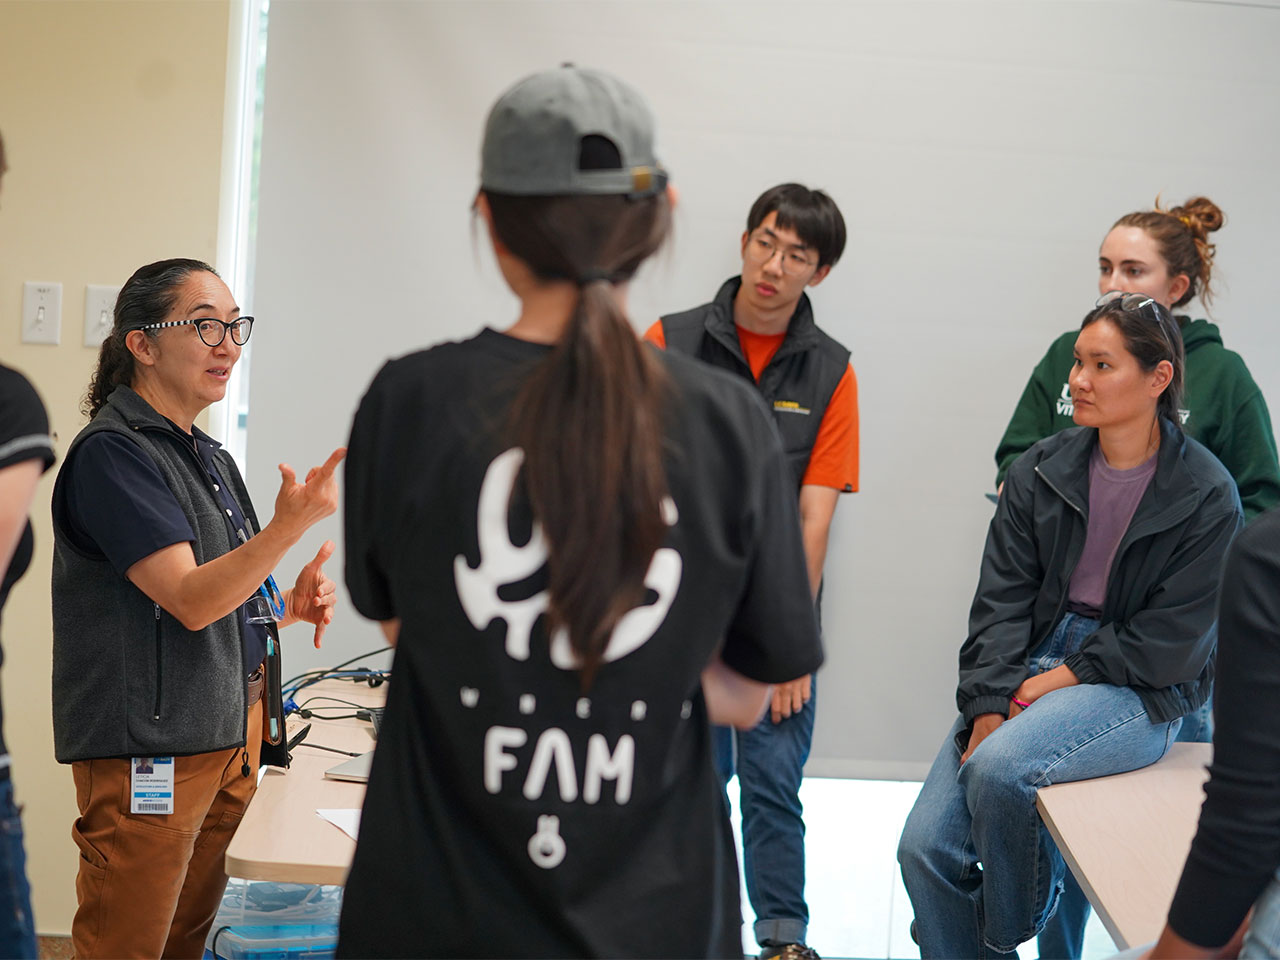 Leticia Chacón-Rodríguez chats with a group of students around her in a classroom.